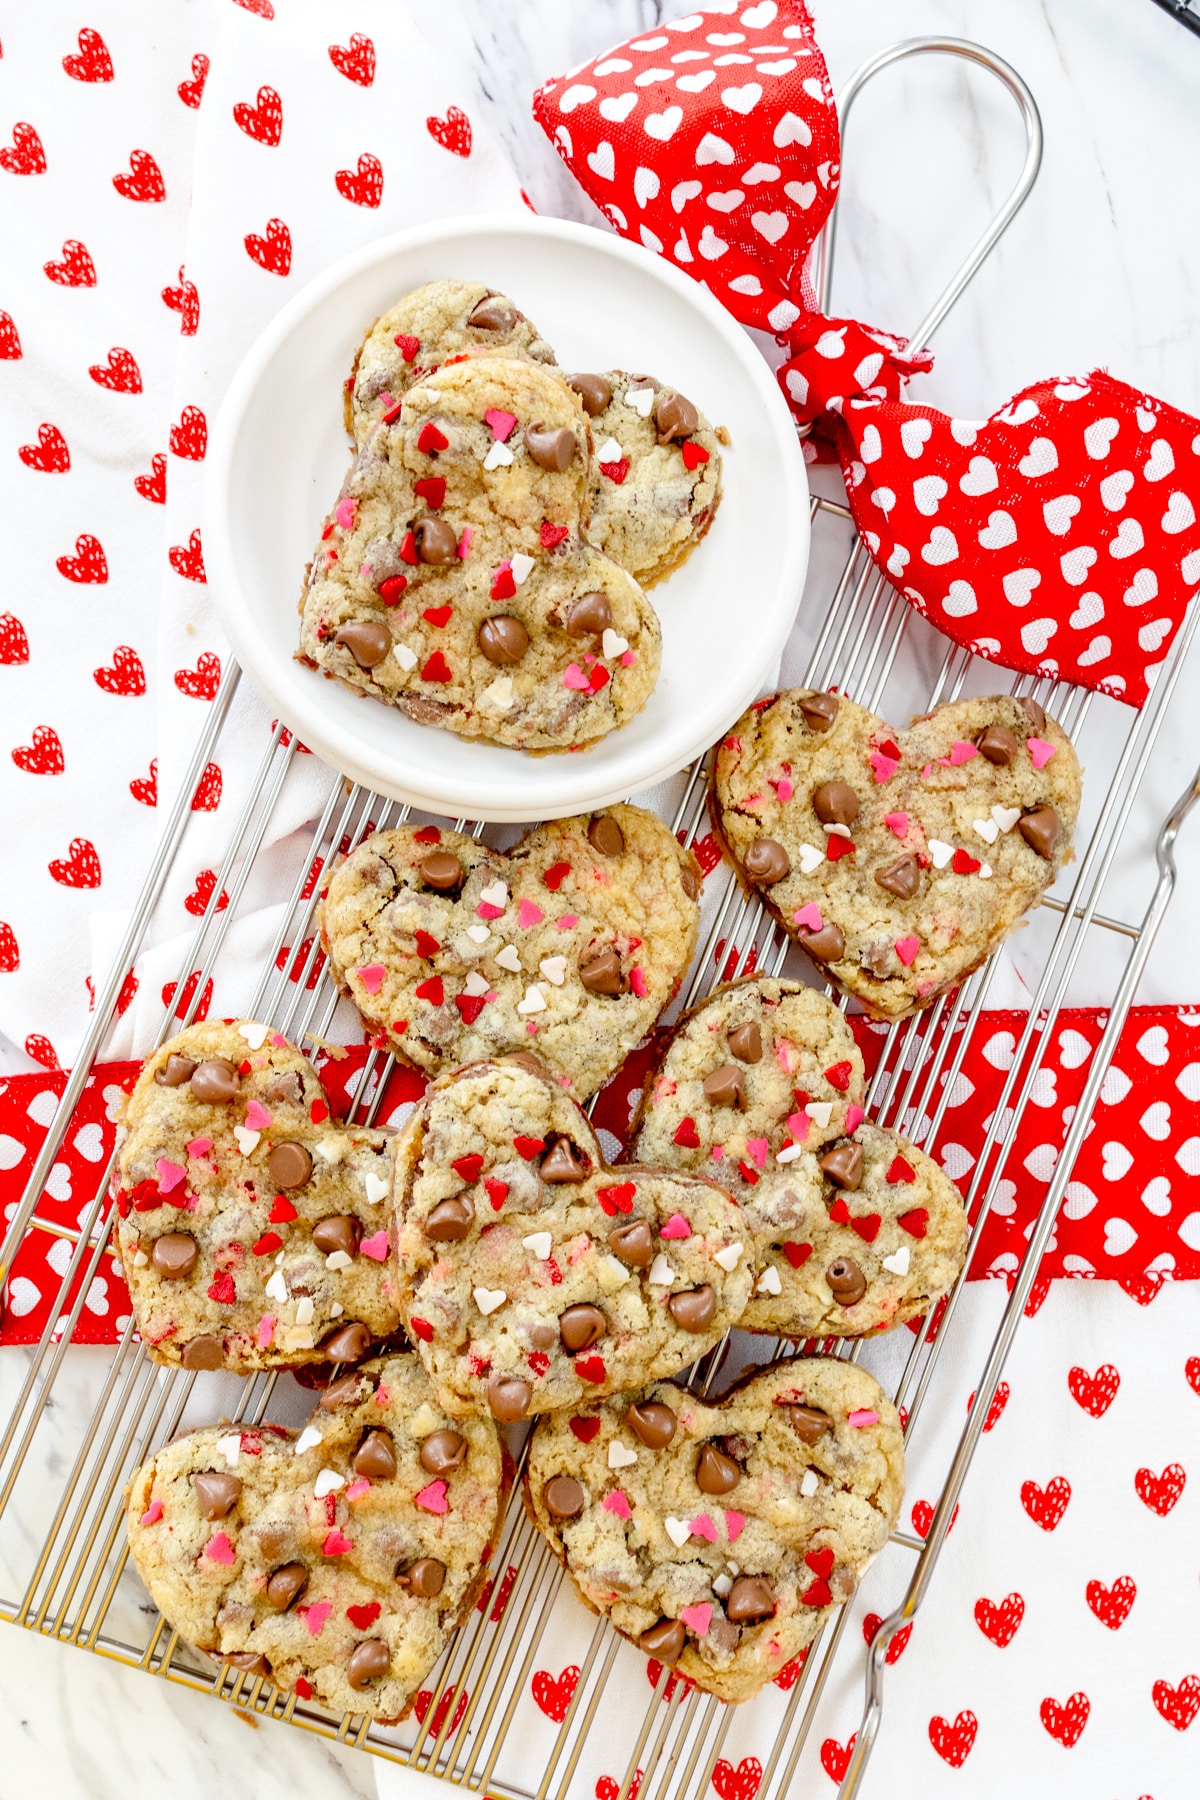 Top view of two heart shaped cookies on a white plate, which is on a wire rack that has other heart shaped cookies on it, and there are love heart decorations around the cookies.